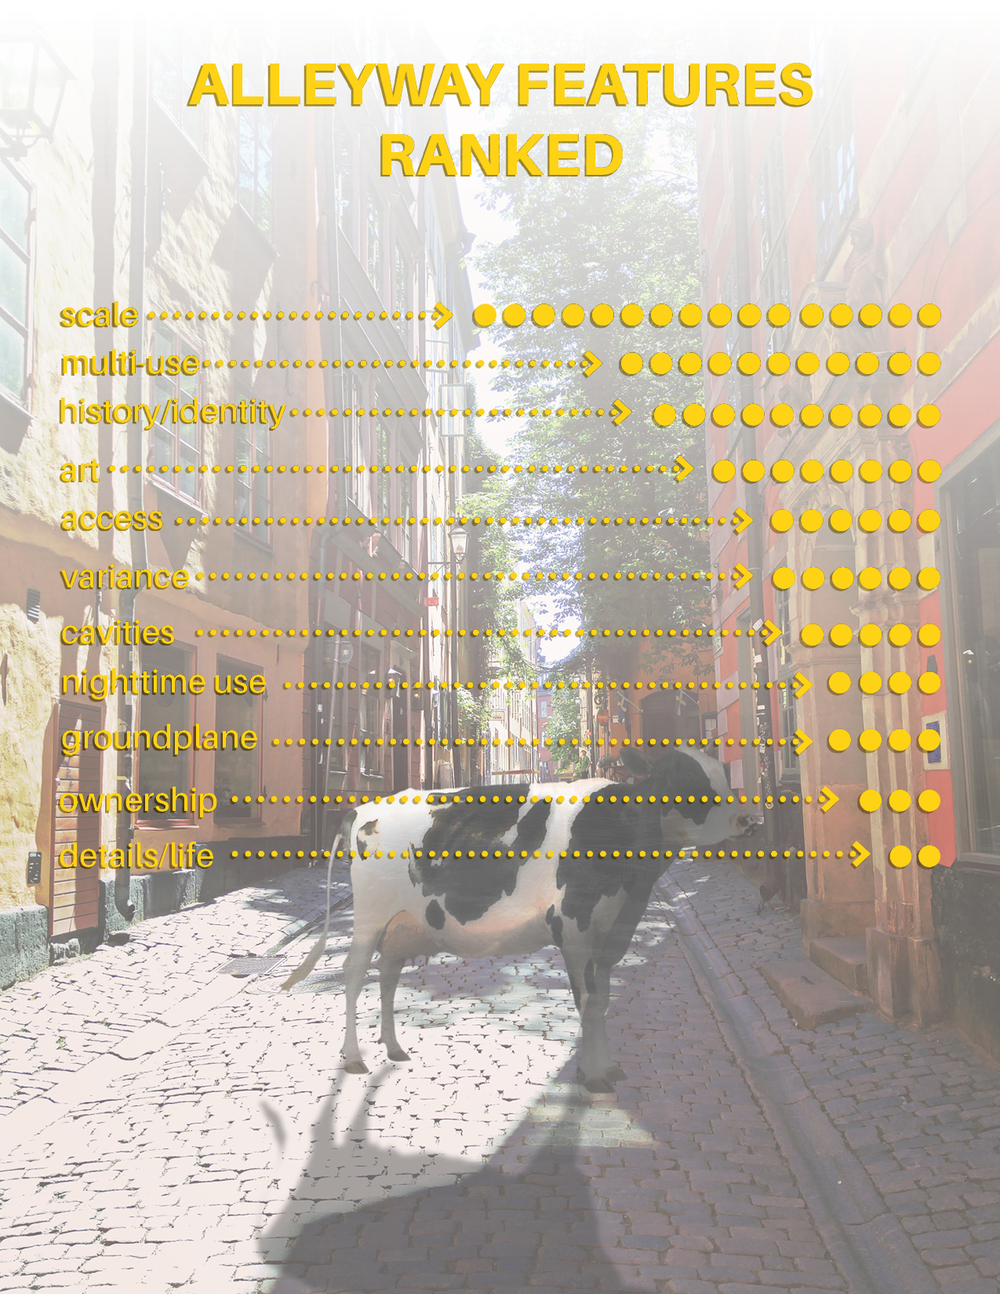 AA_Features_Ranked.jpg